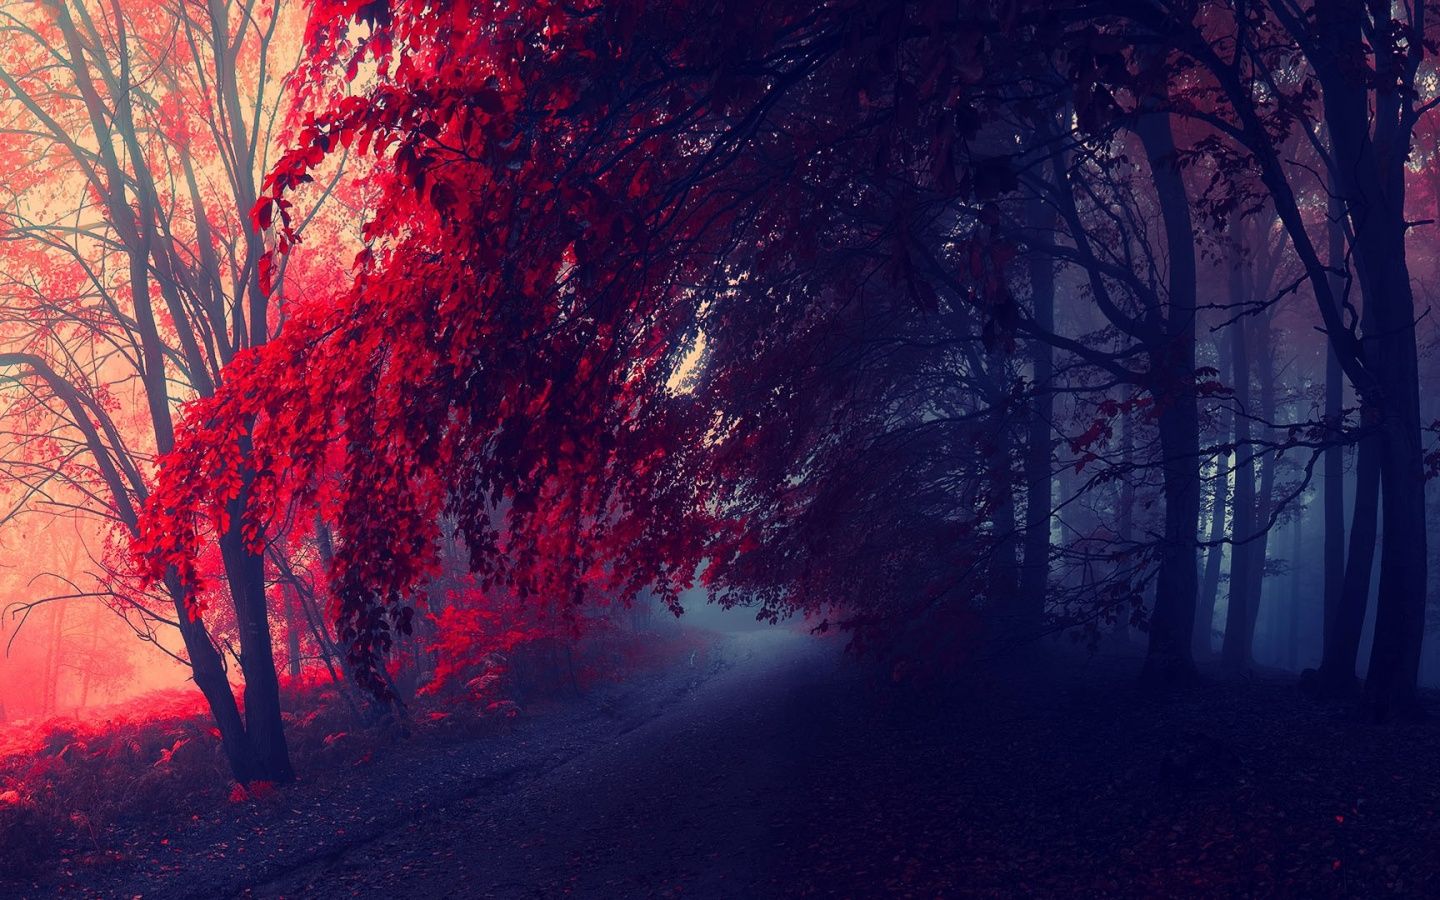 A red tree on a foggy path in the woods. - Crimson